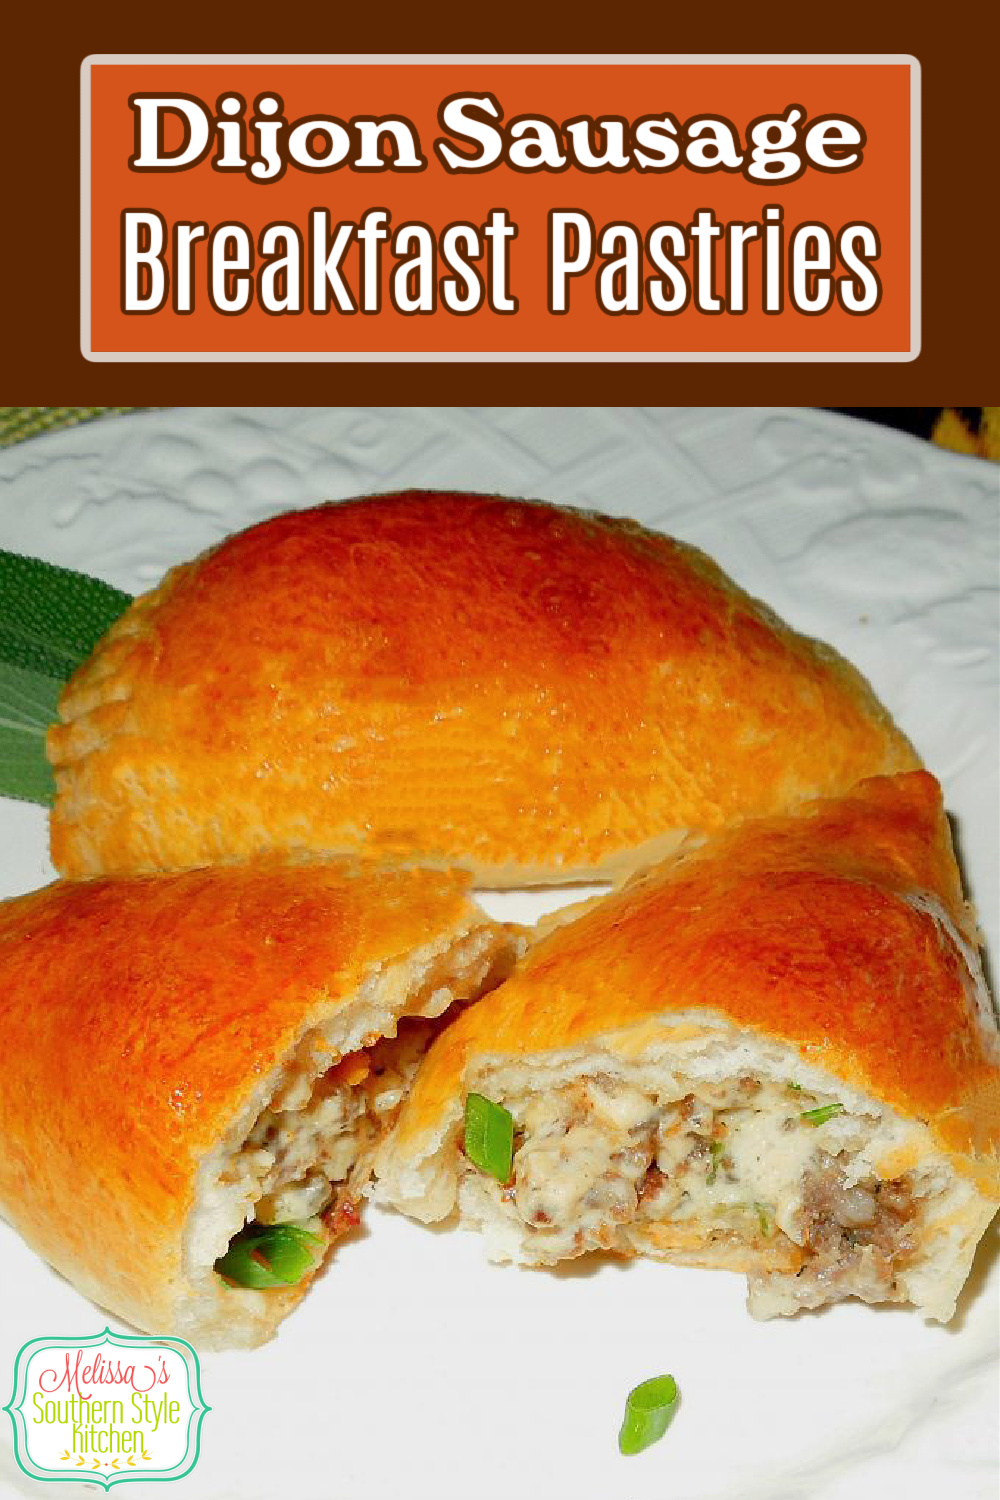 Start your morning with these easy Dijon Sausage Filled Breakfast Pastries #sausagepastries #breakfastpastries #sausagerecipes #brunch #pastries #cannedbiscuitrecipes #dijonsausagepastries #easyrecipes #southernfood #southernrecipes #breakfastrecipes #breakfast via @melissasssk